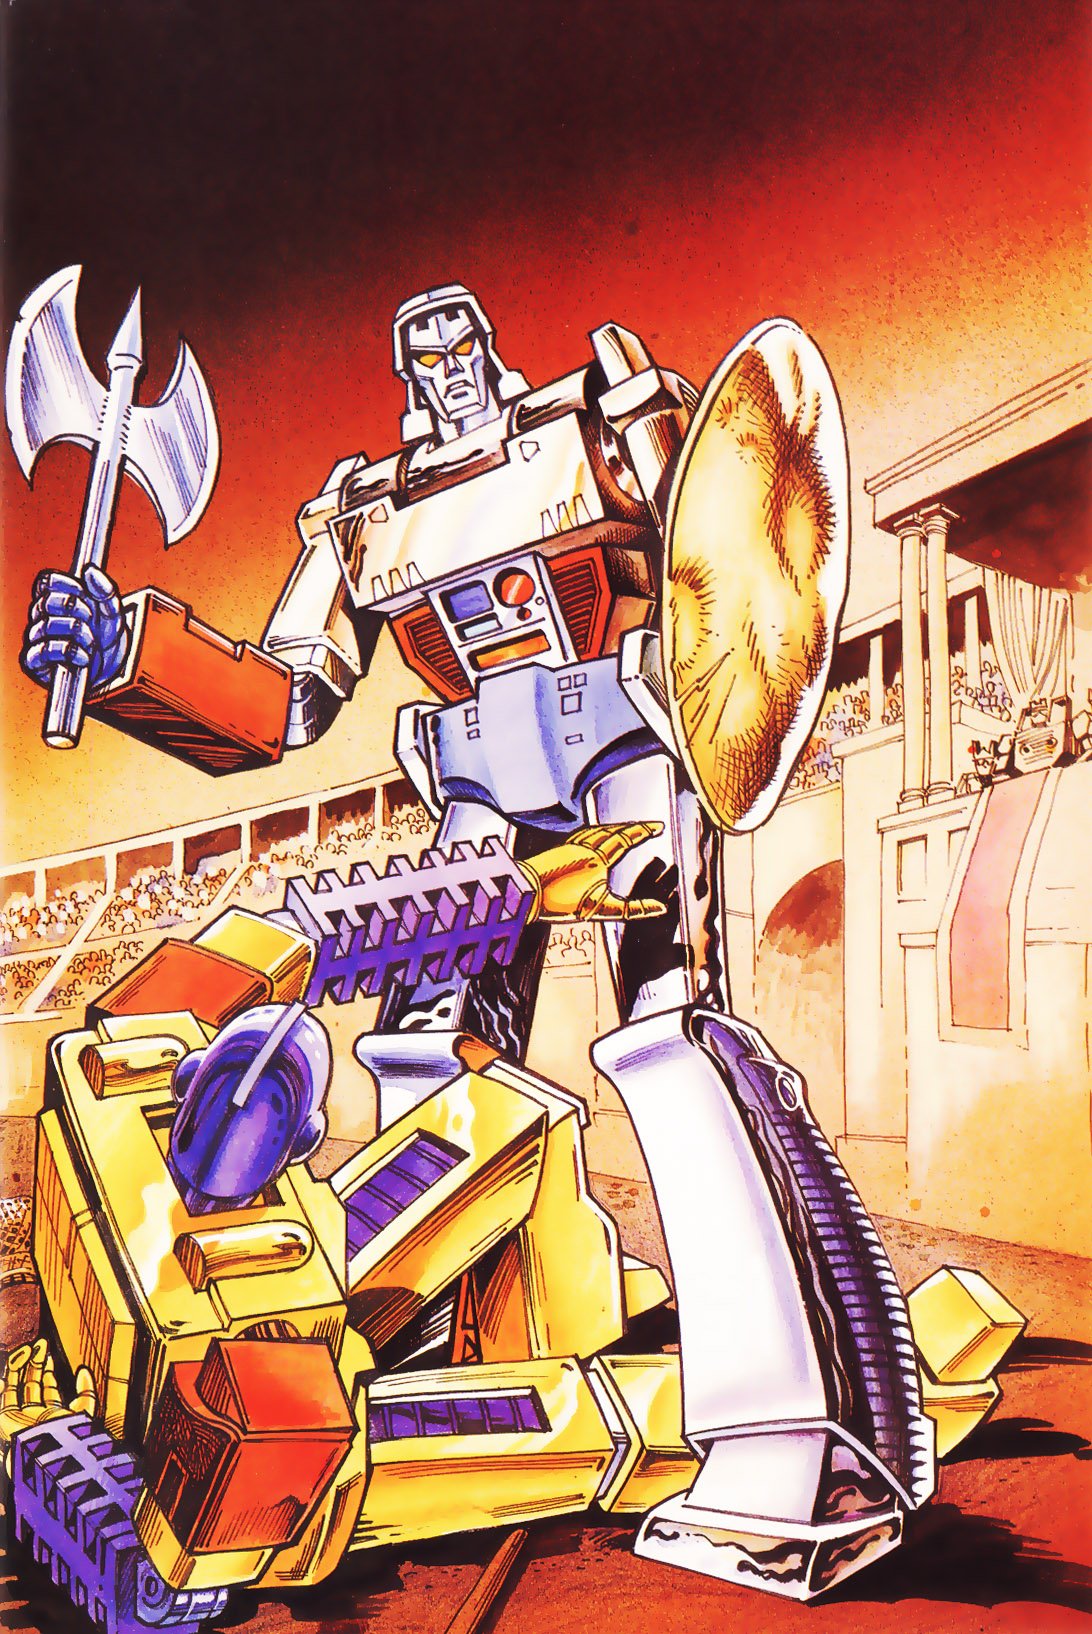 Megatron standing over Sunstreaker with his energy axe